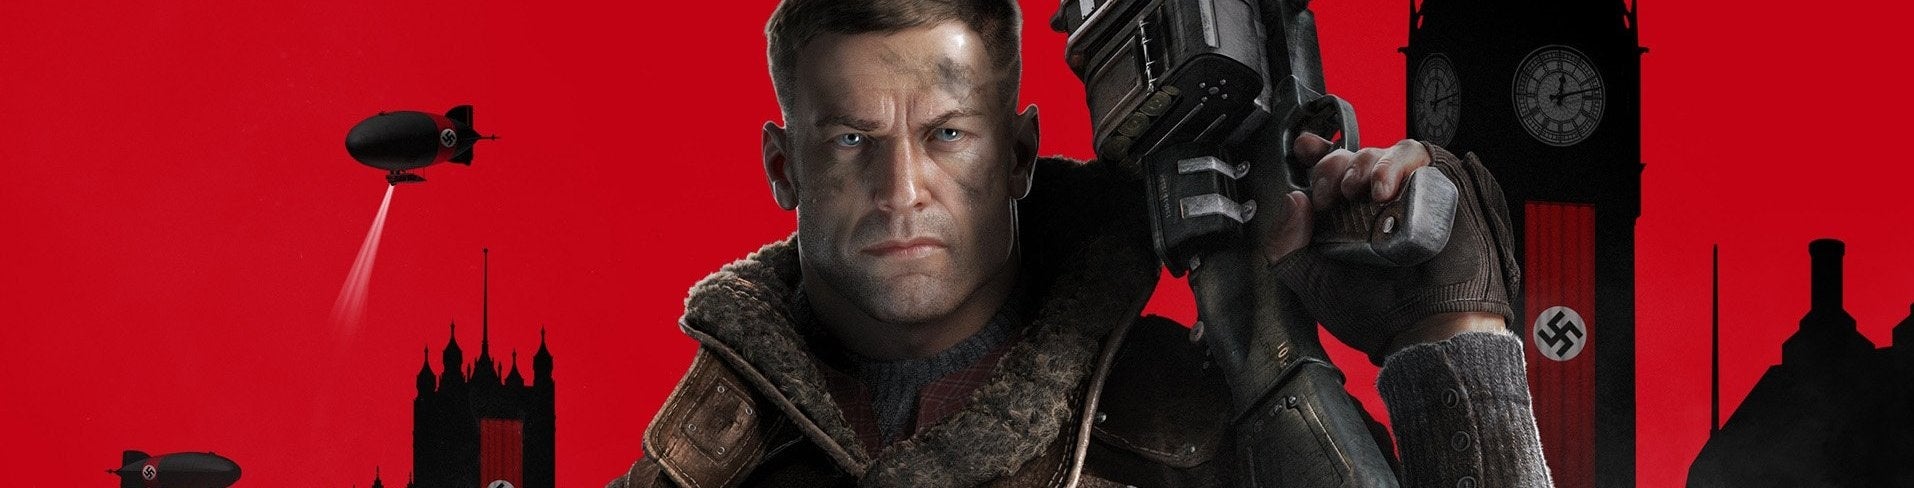 Immagine di Wolfenstein: The New Order - Reloaded